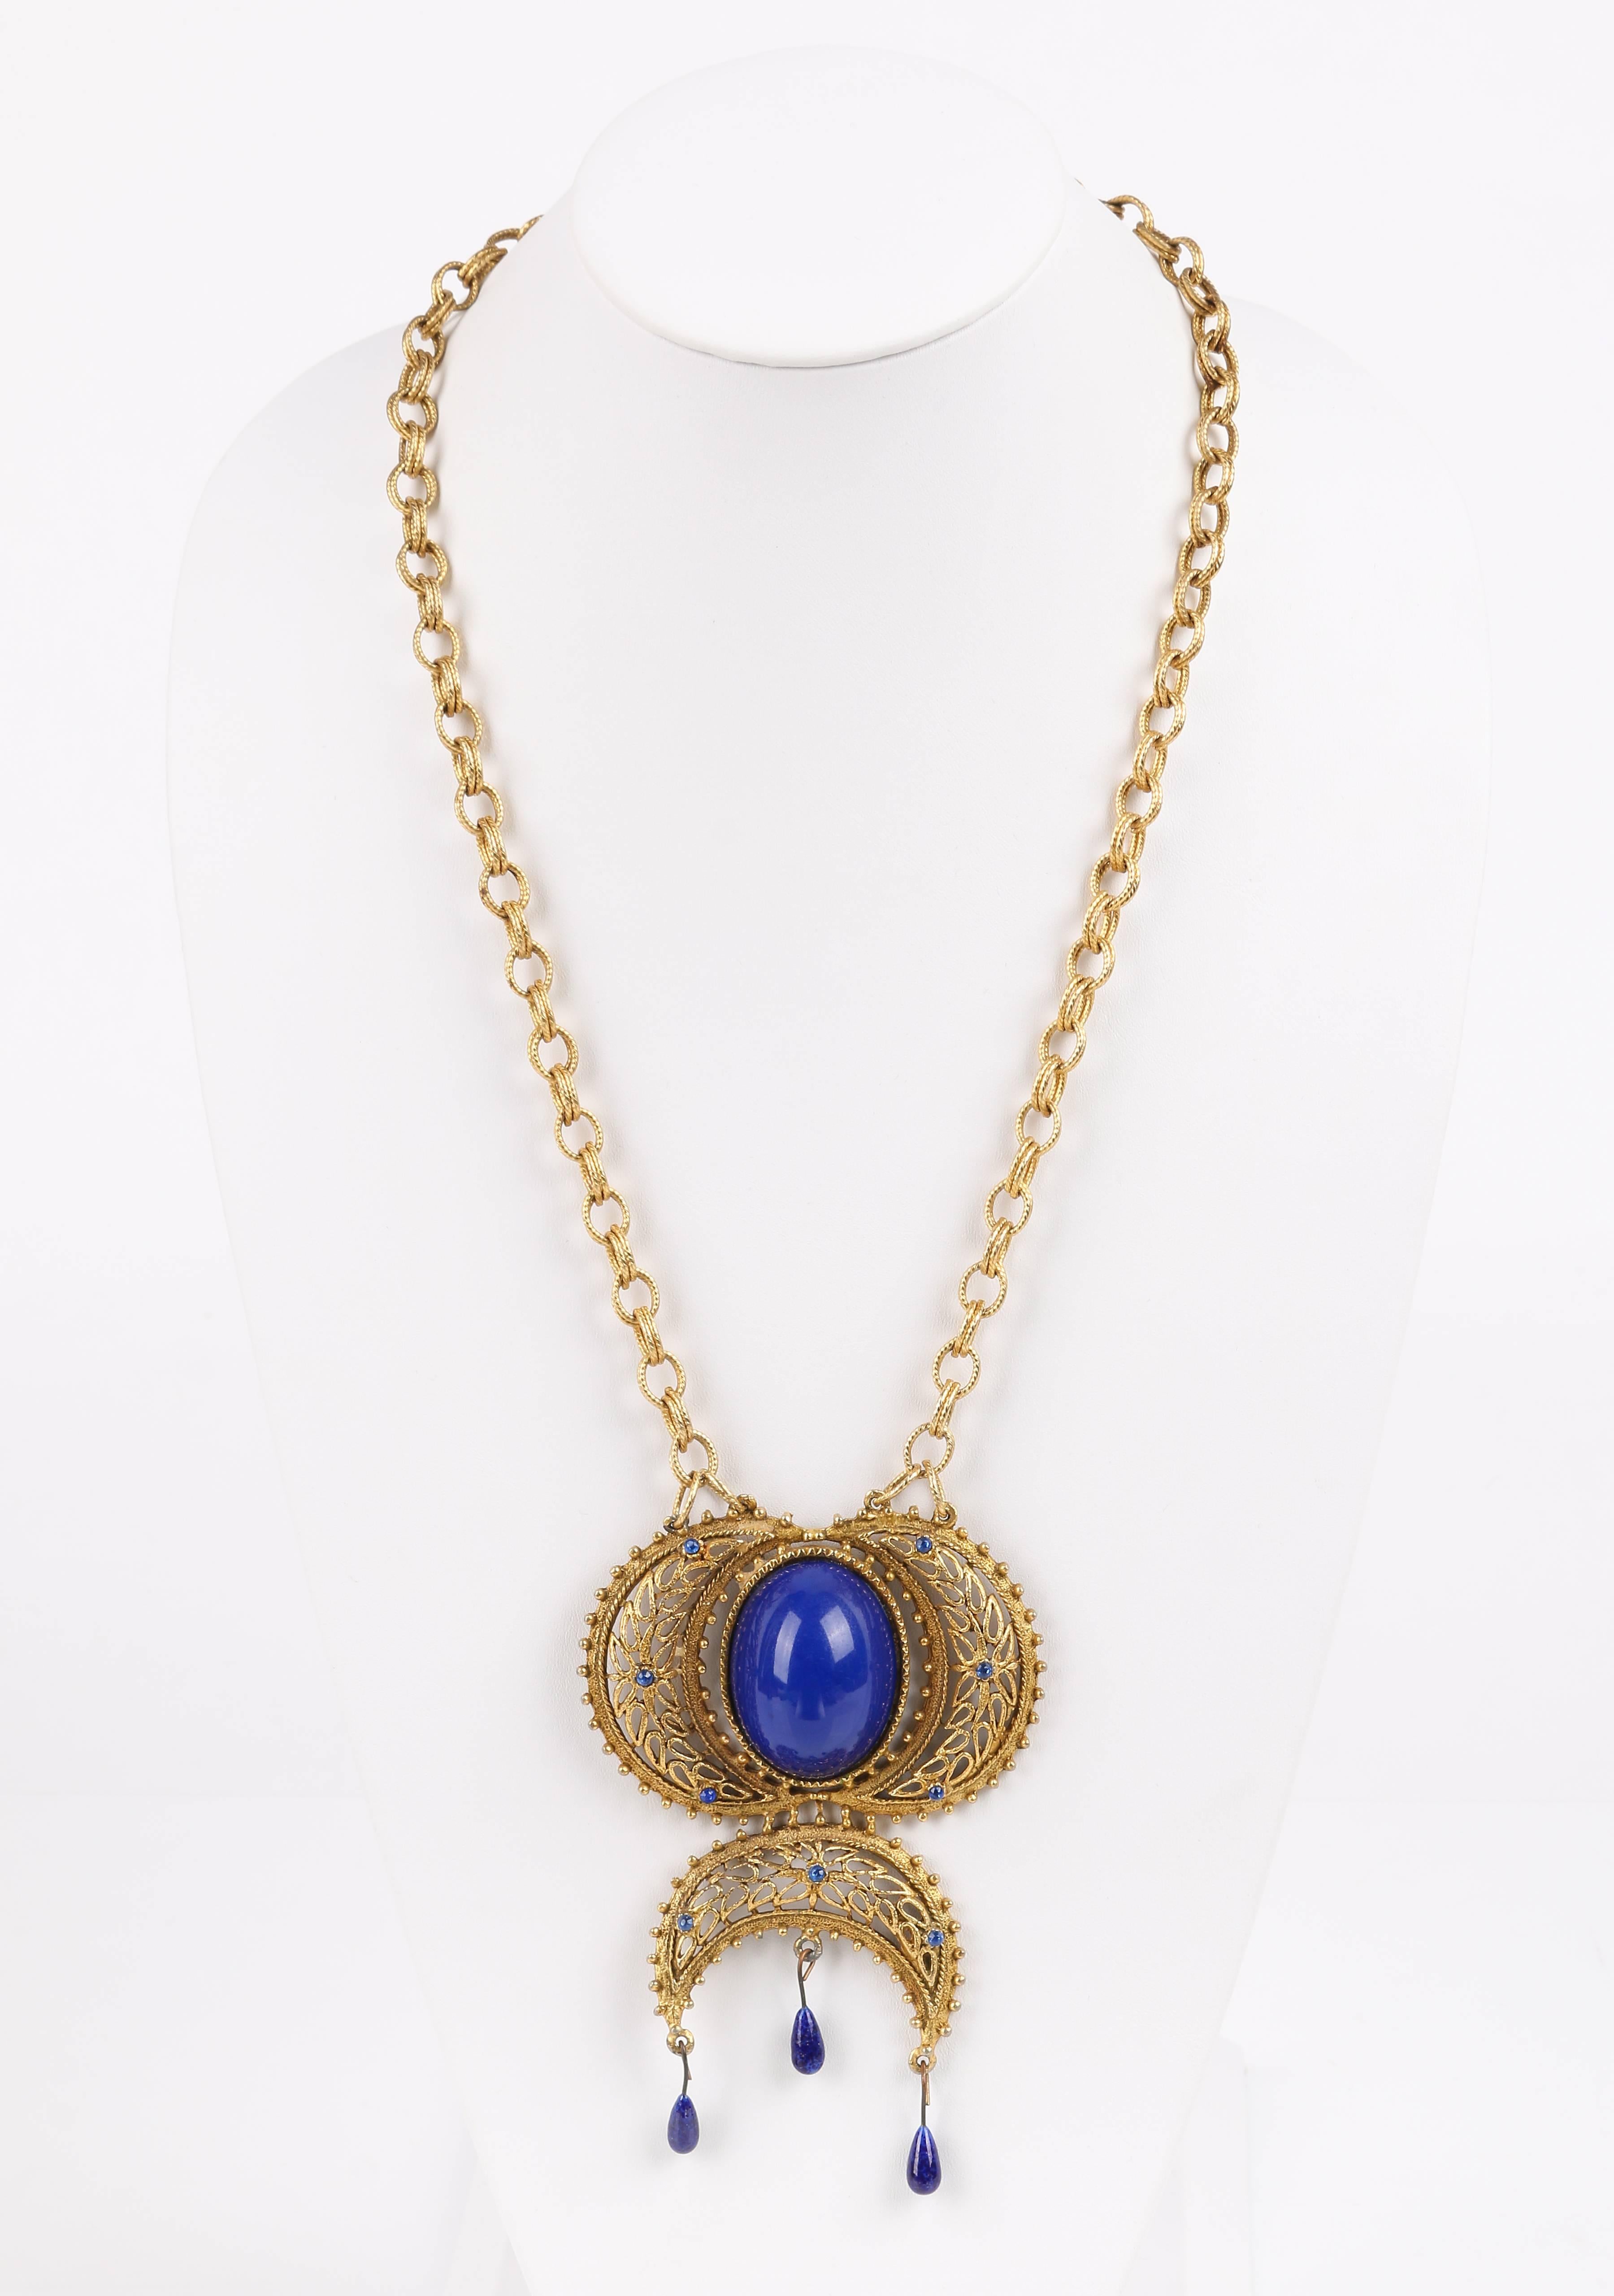 Vintage c.1980's one of a kind Napier pendant and D&E Juliana chain jewelry artisan created Egyptian revival statement necklace. Large statement pendant has three gold tone open work metal crescents surrounding a large blue colored cabochon domed